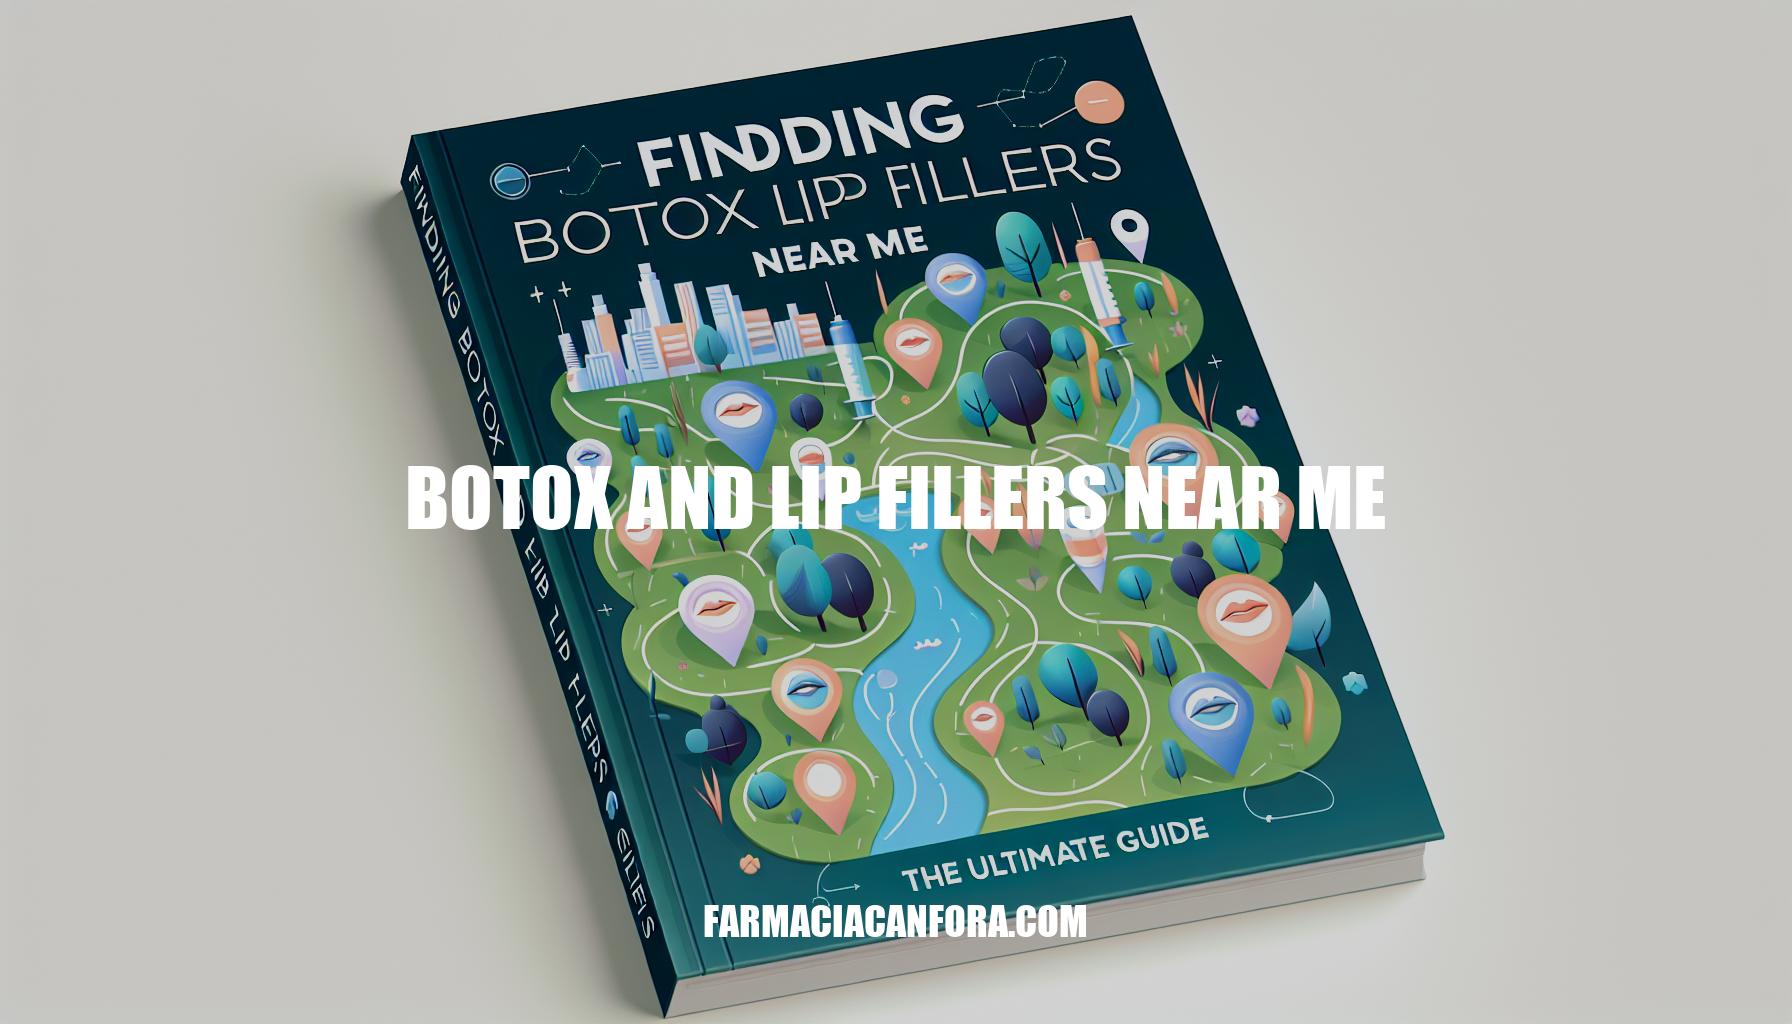 Finding Botox and Lip Fillers Near Me: The Ultimate Guide